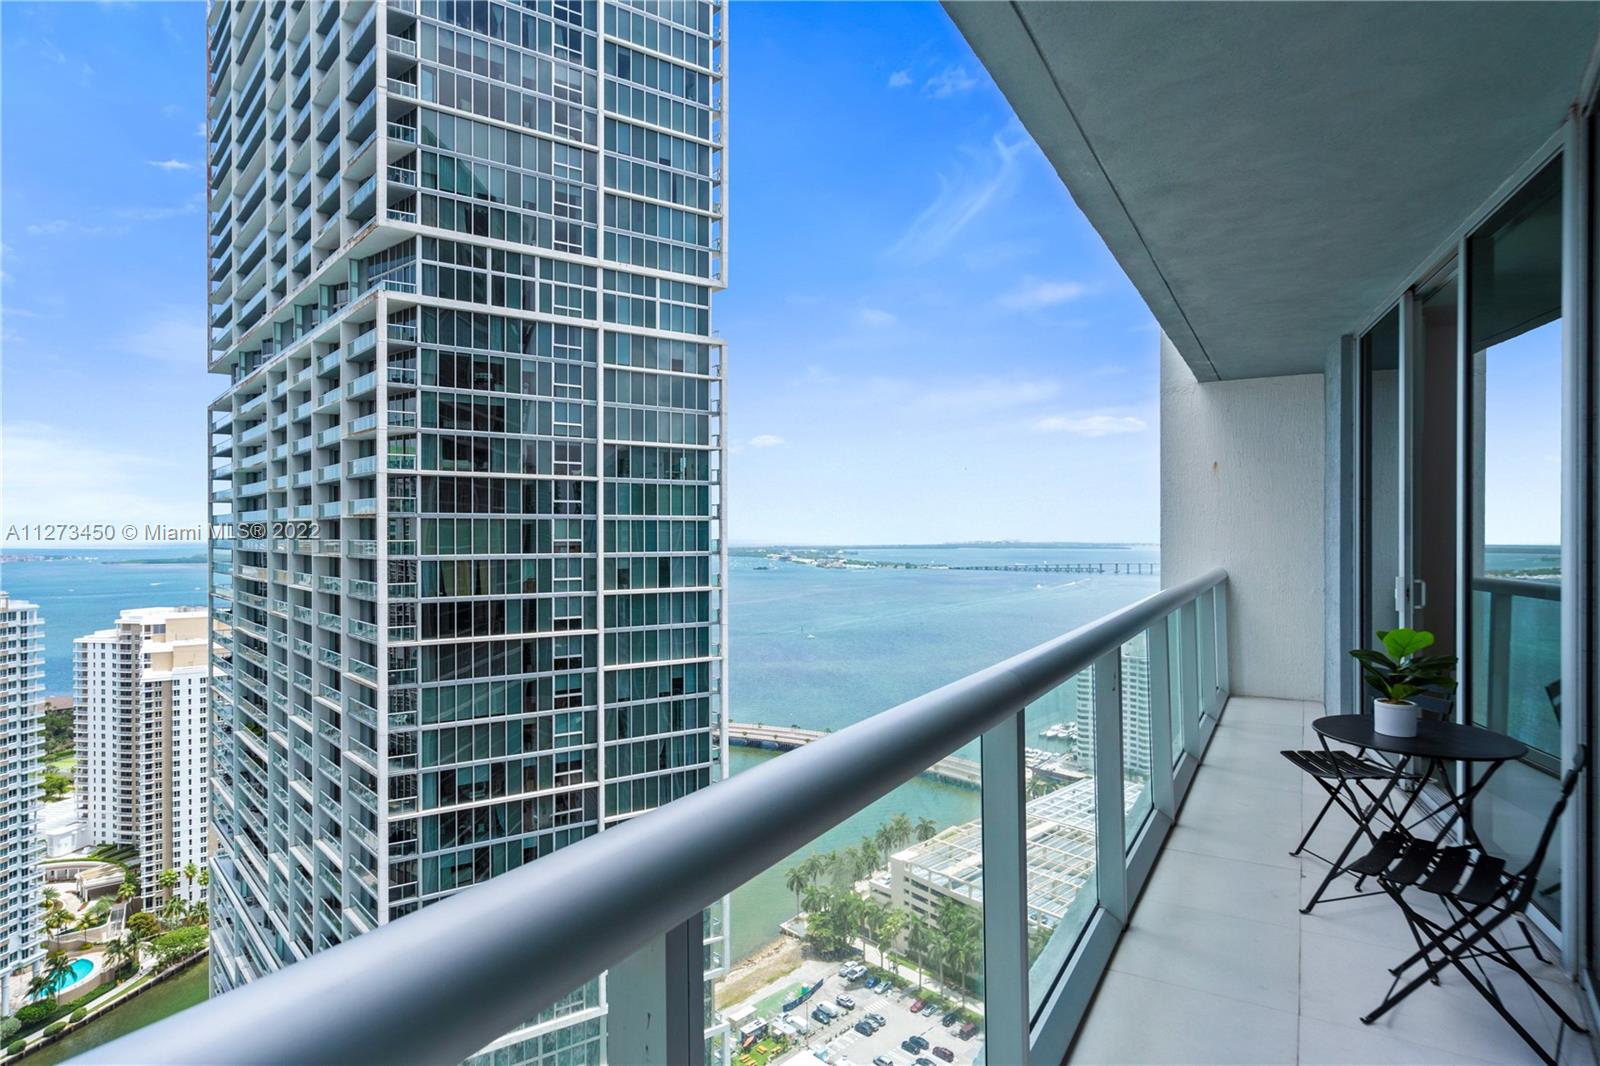 OCEANVIEWS FROM MASTER BEDROOM AND LIVING ROOM.***NO SUBLEASE ALLOW***. PRICES VARY DEPENDING ON THE SEASON.ONE TIME $160 CLEANING FEE.RENT DOESNT INCLUDE ELECTRICITY. Pet cleaning fee AND deposit apply. Take Brickell Avenue towards downtown and building will be your right before the bridge (W Hotel).